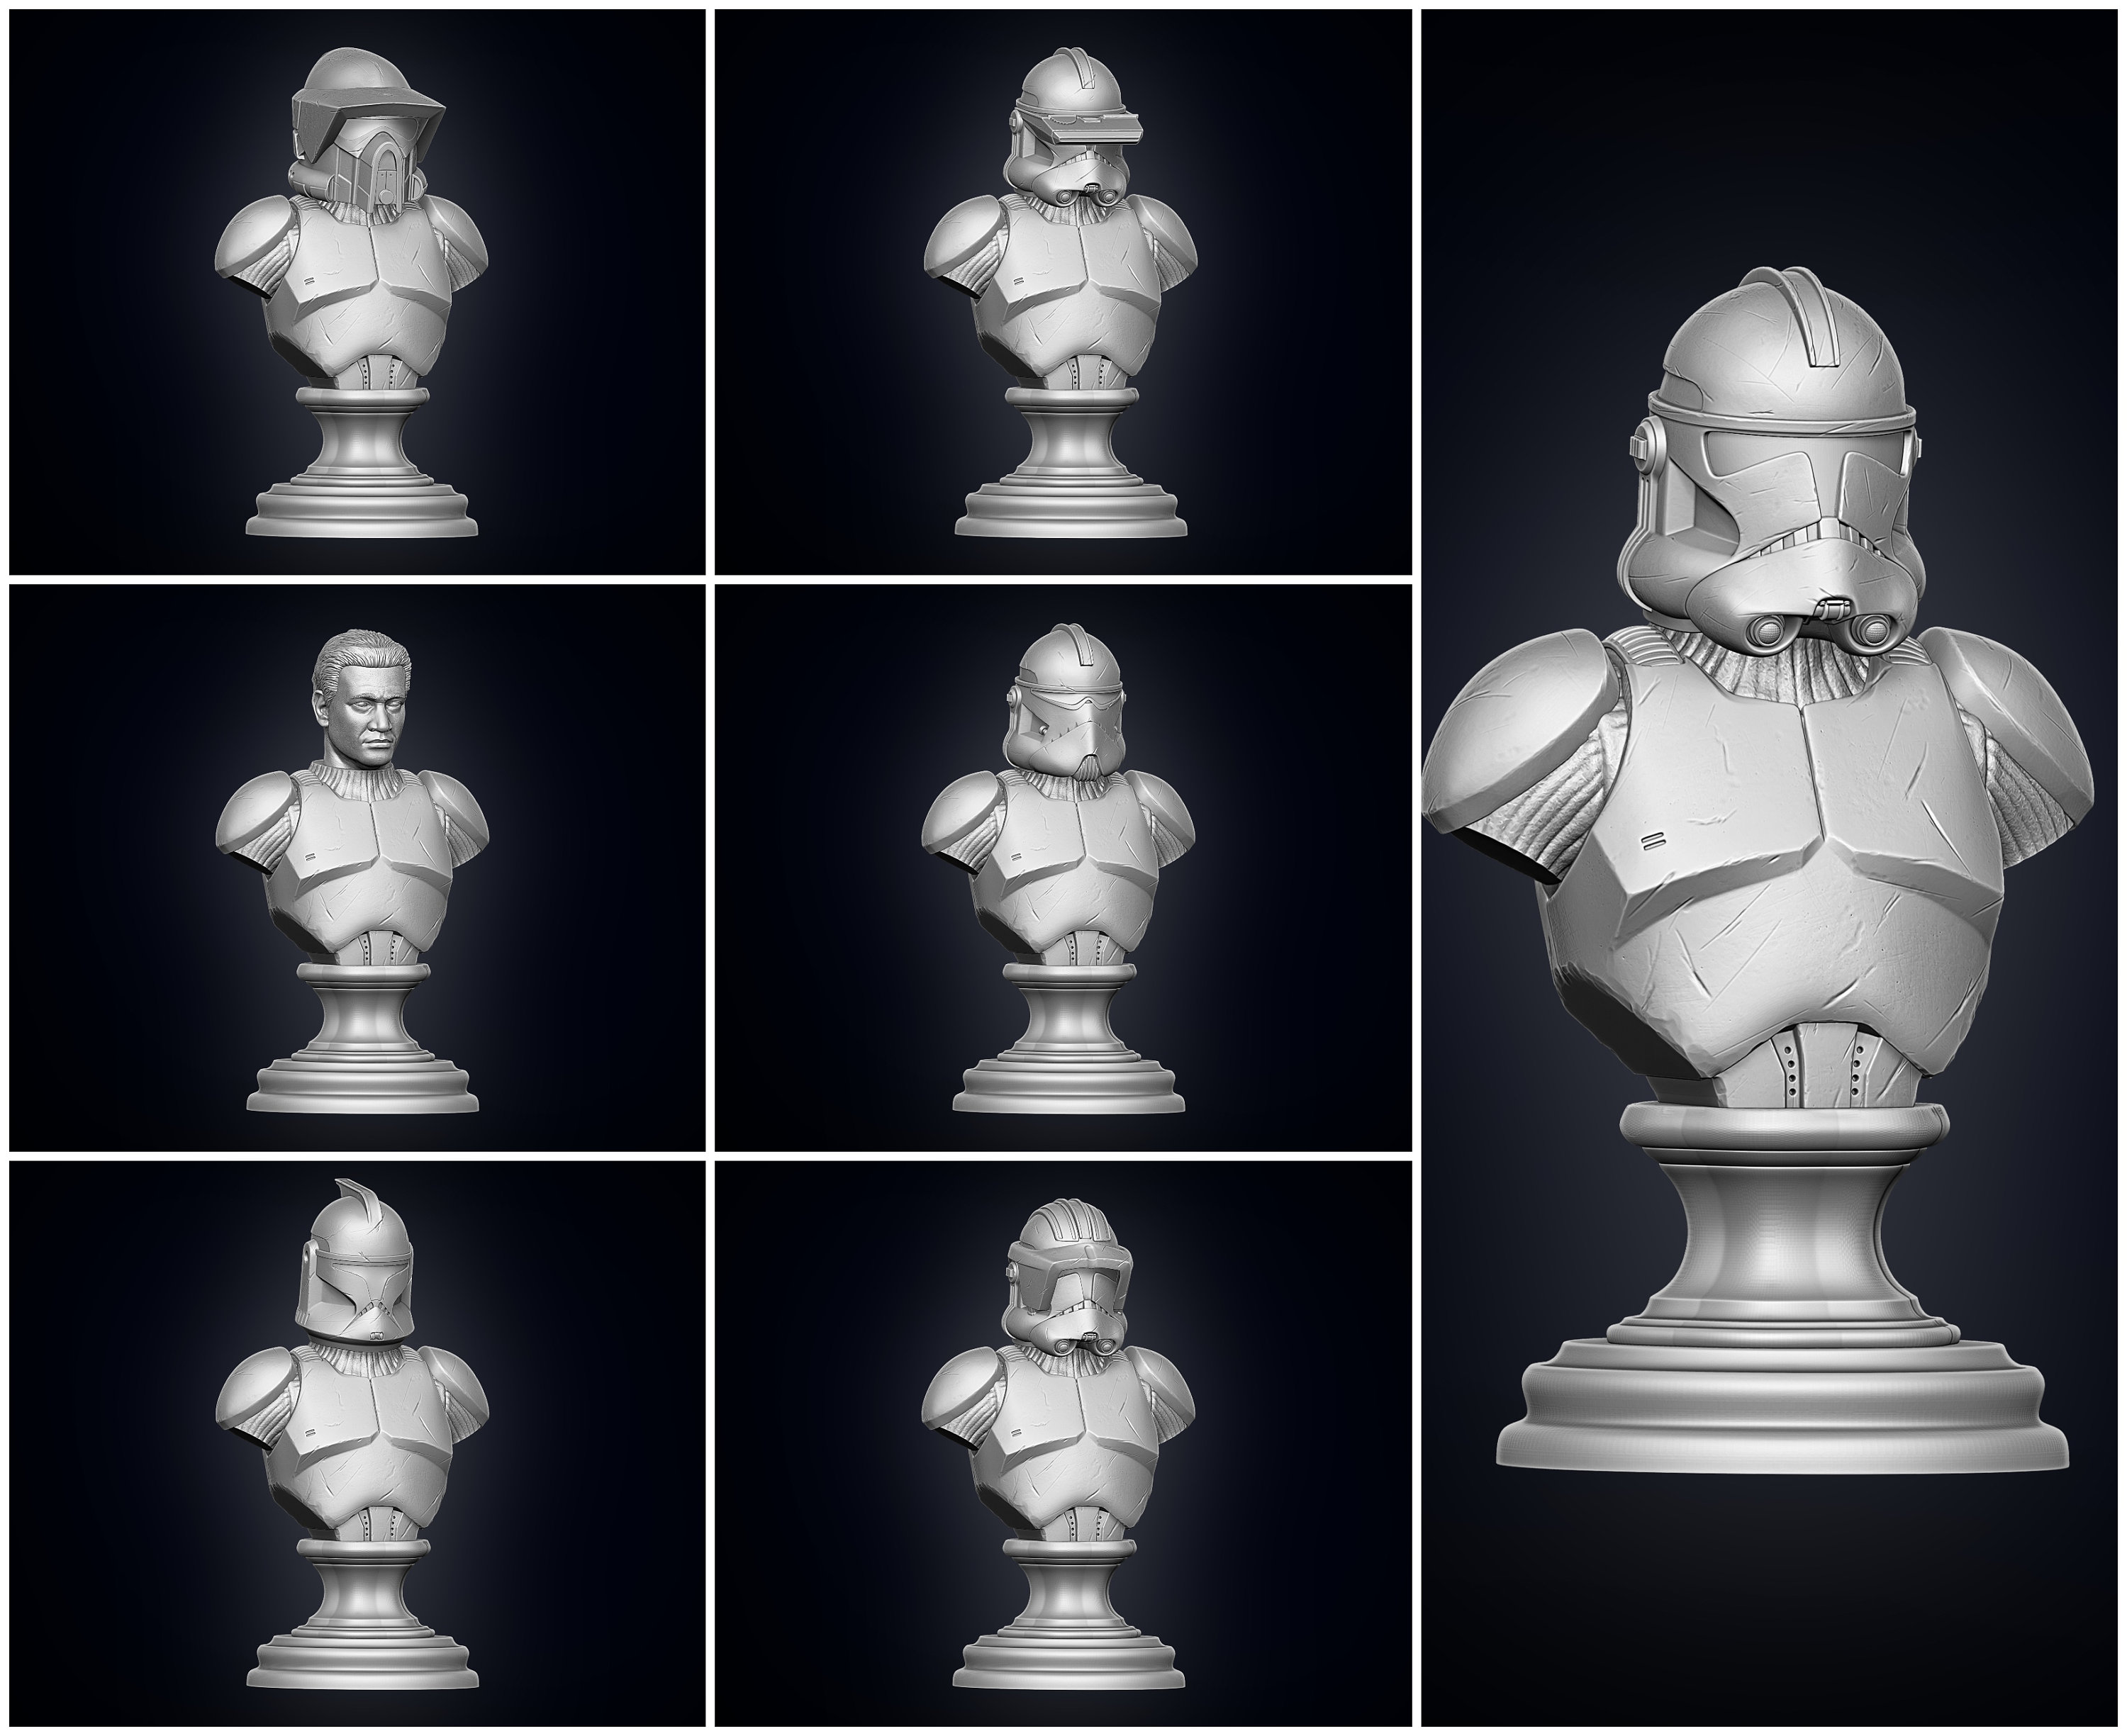 ARC Trooper Bust - 3D Print Files – Galactic Armory